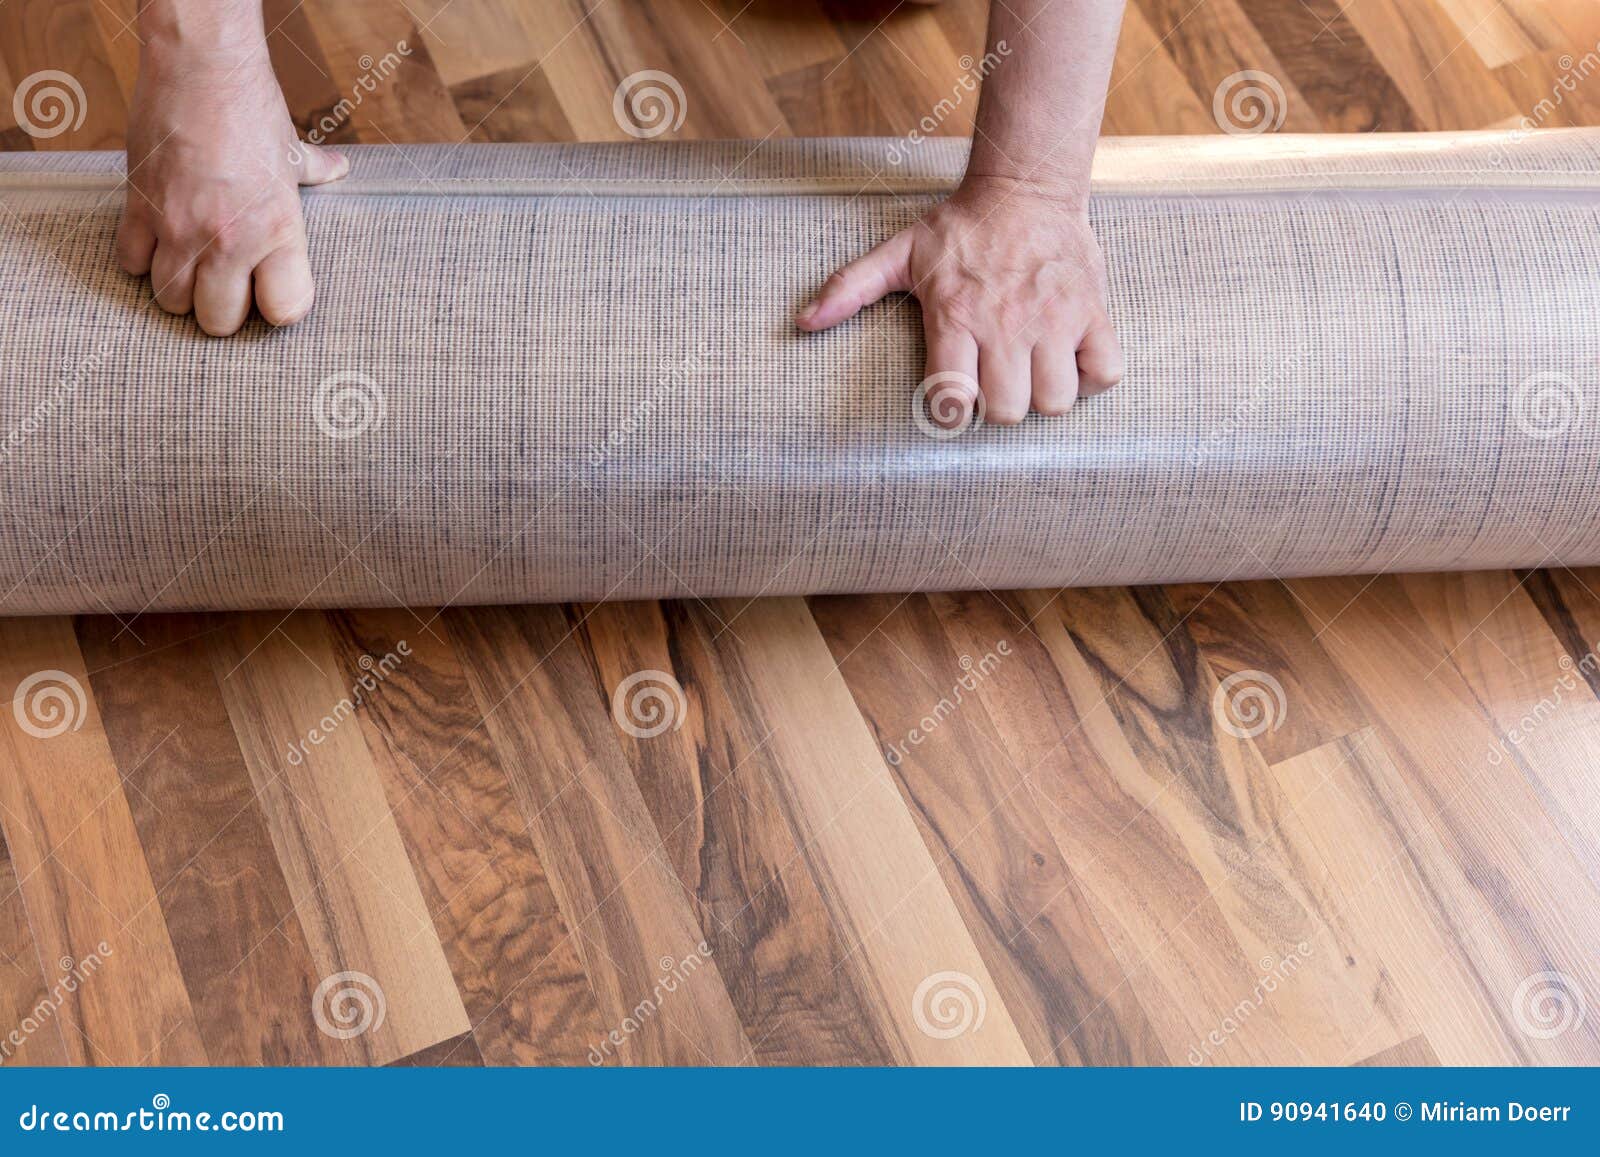 ManÂ´s Hand with a New Rolled Carpet on the Floor Stock Photo - Image ...